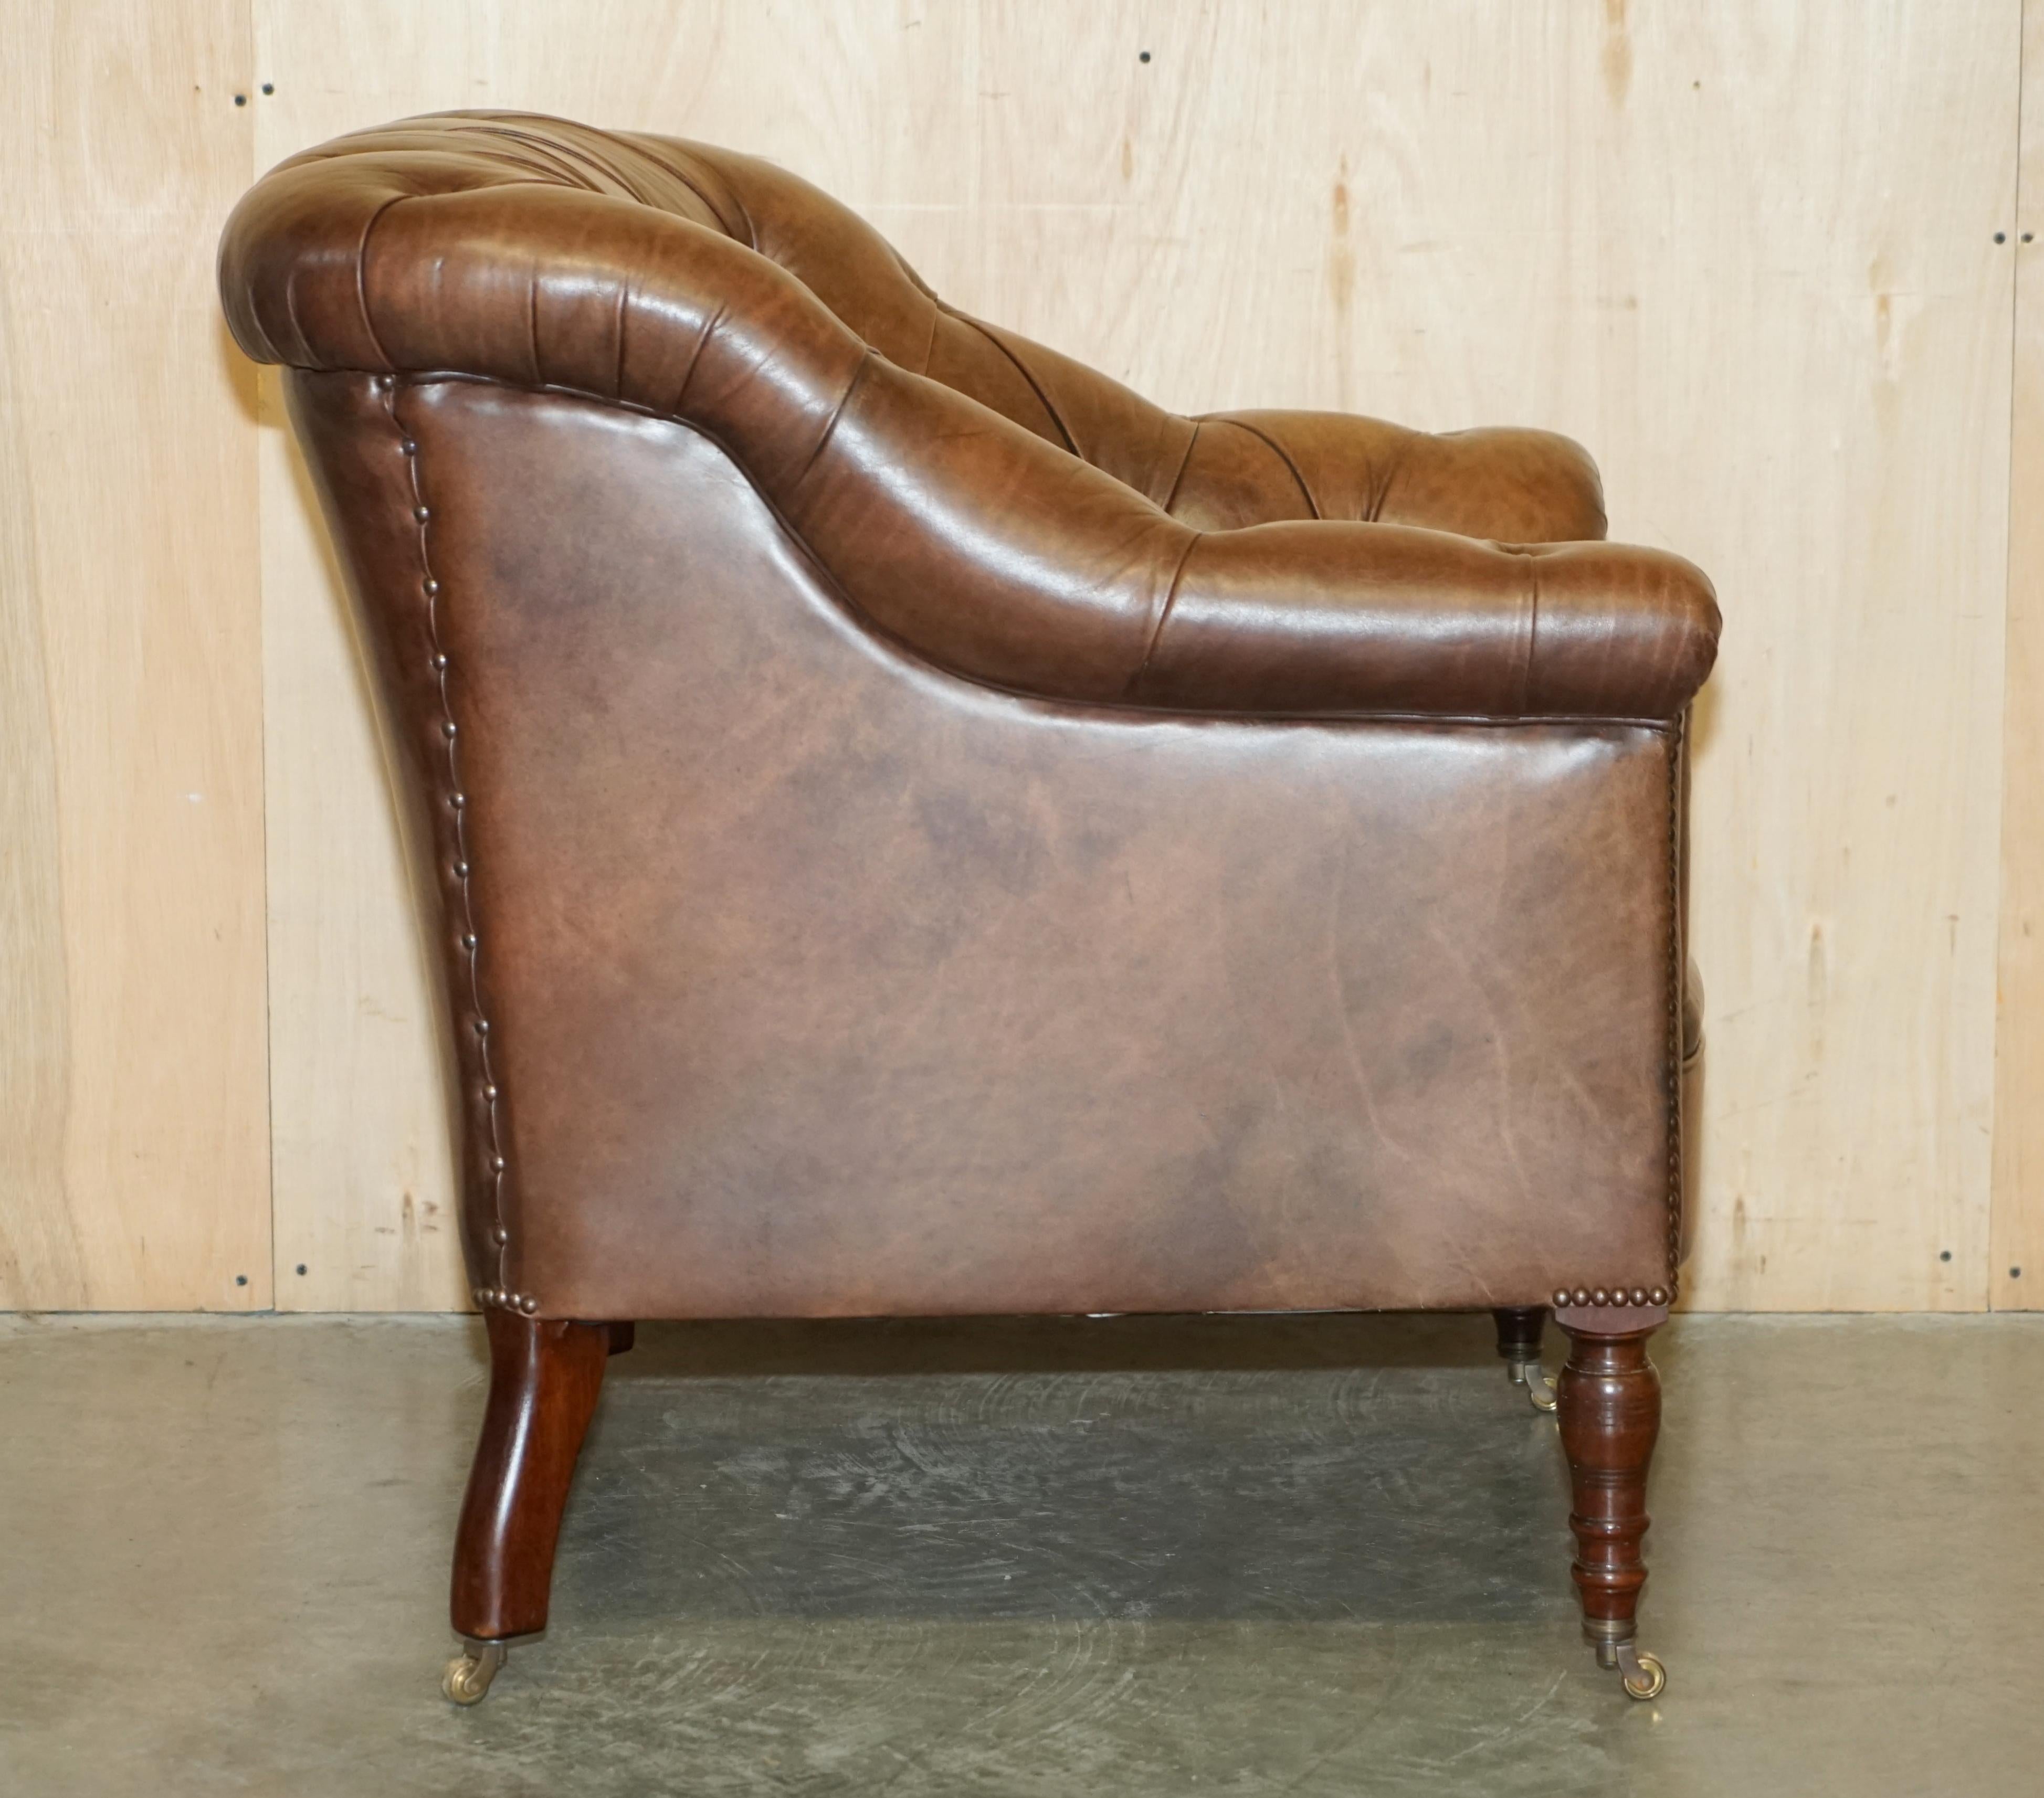  GEORGE SMiTH SOMERVILLE BROWN LEATHER CHESTERFIELD ARMCHAIR For Sale 8